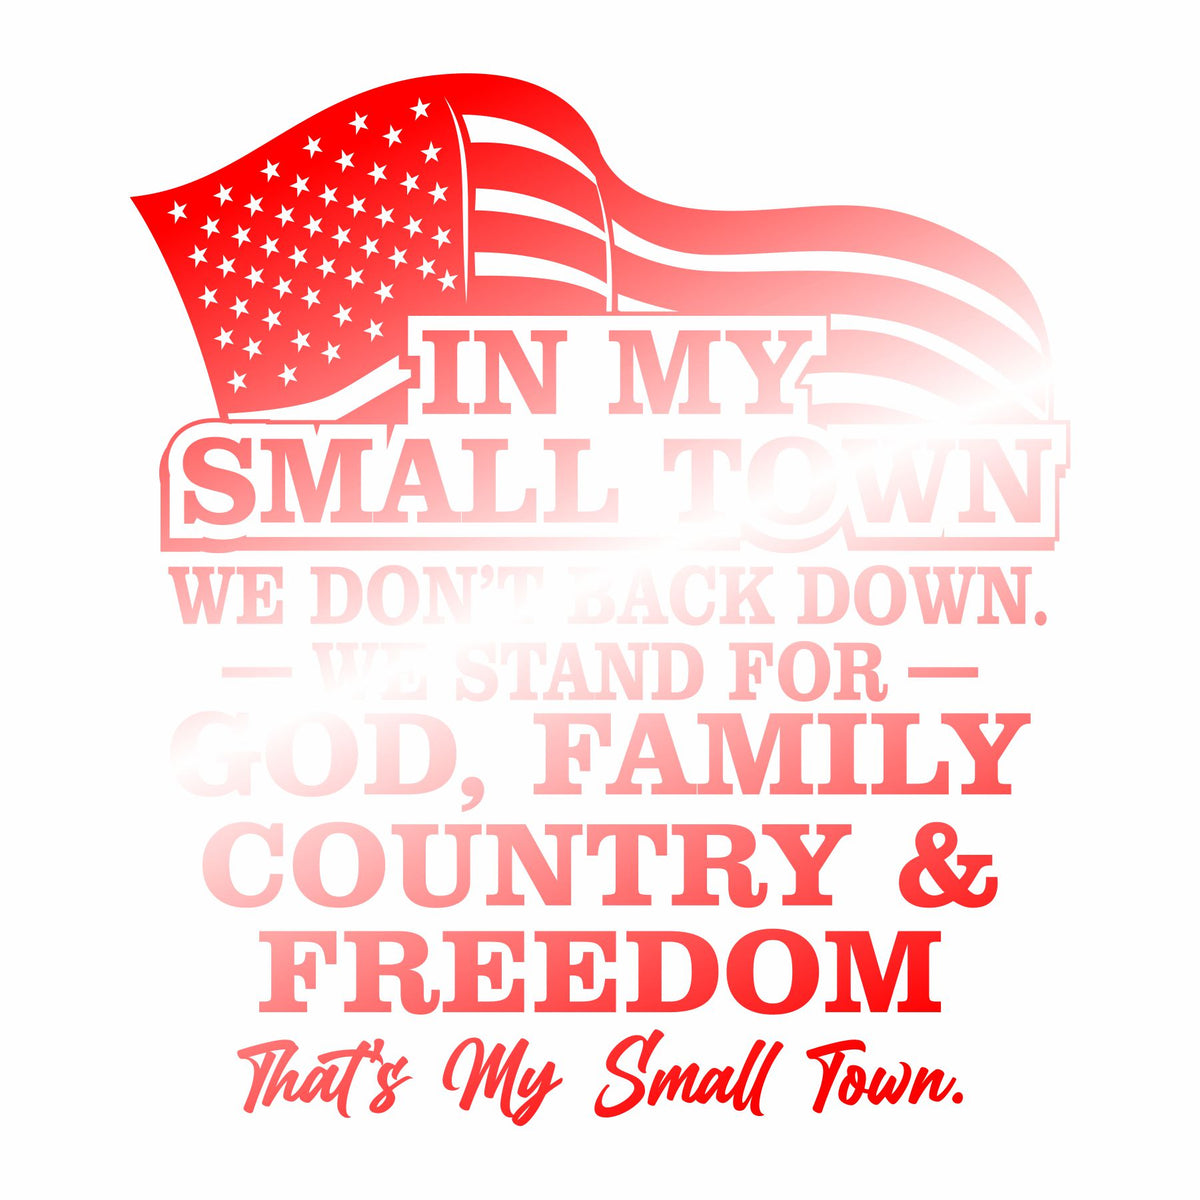 In My Small Town - American Flag Waving - Vinyl Decal - Free Shipping